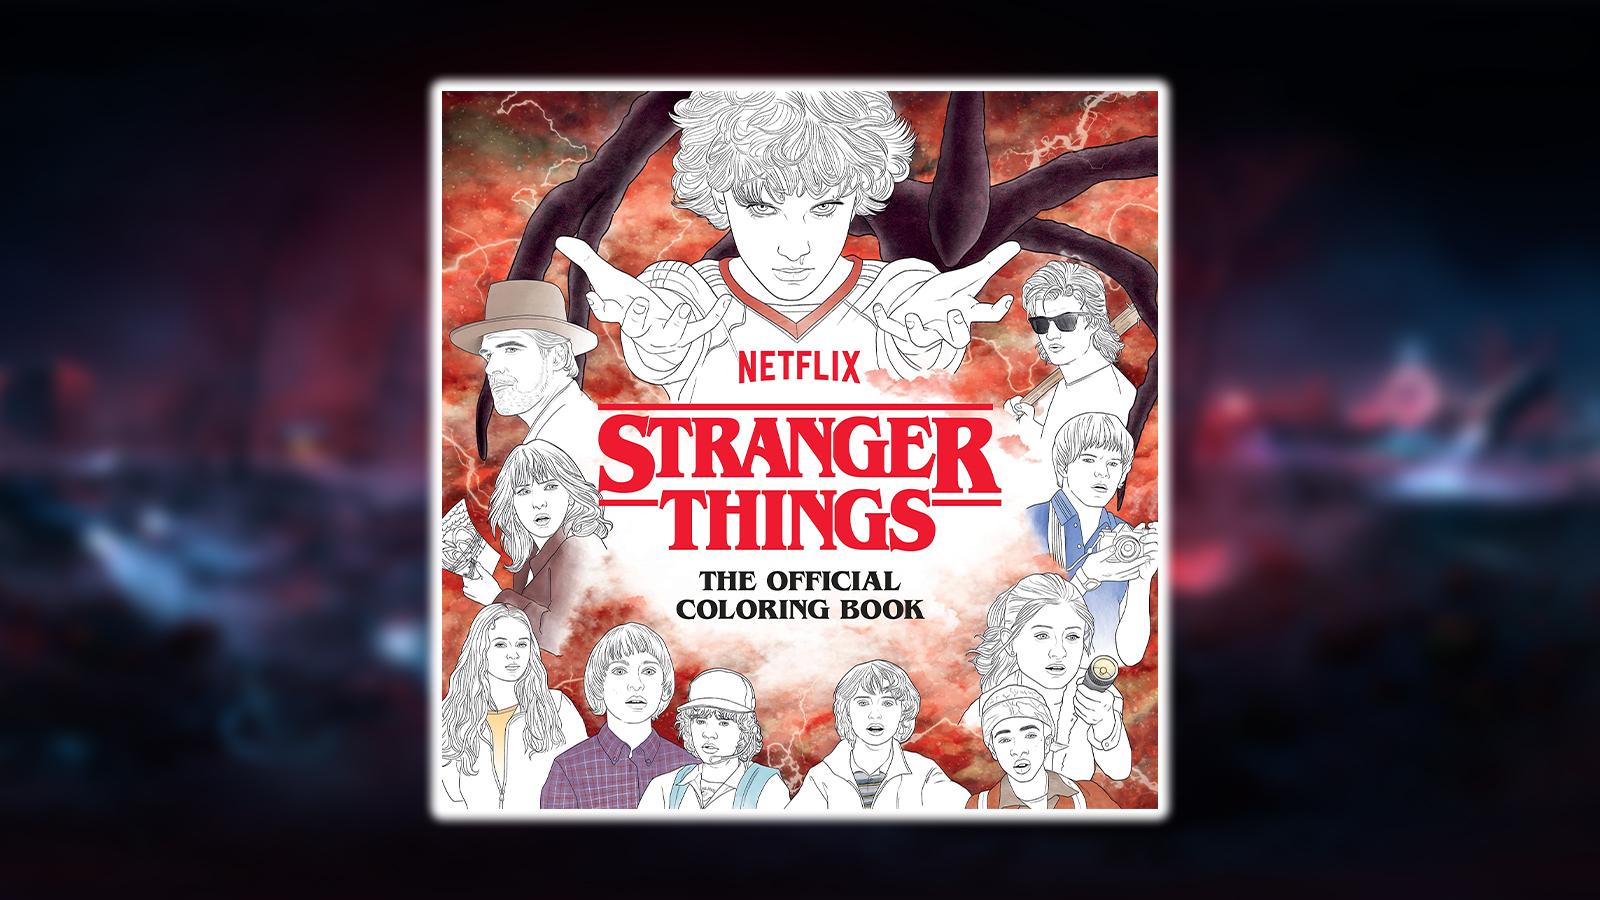 cover art for the official Stranger Things coloring book